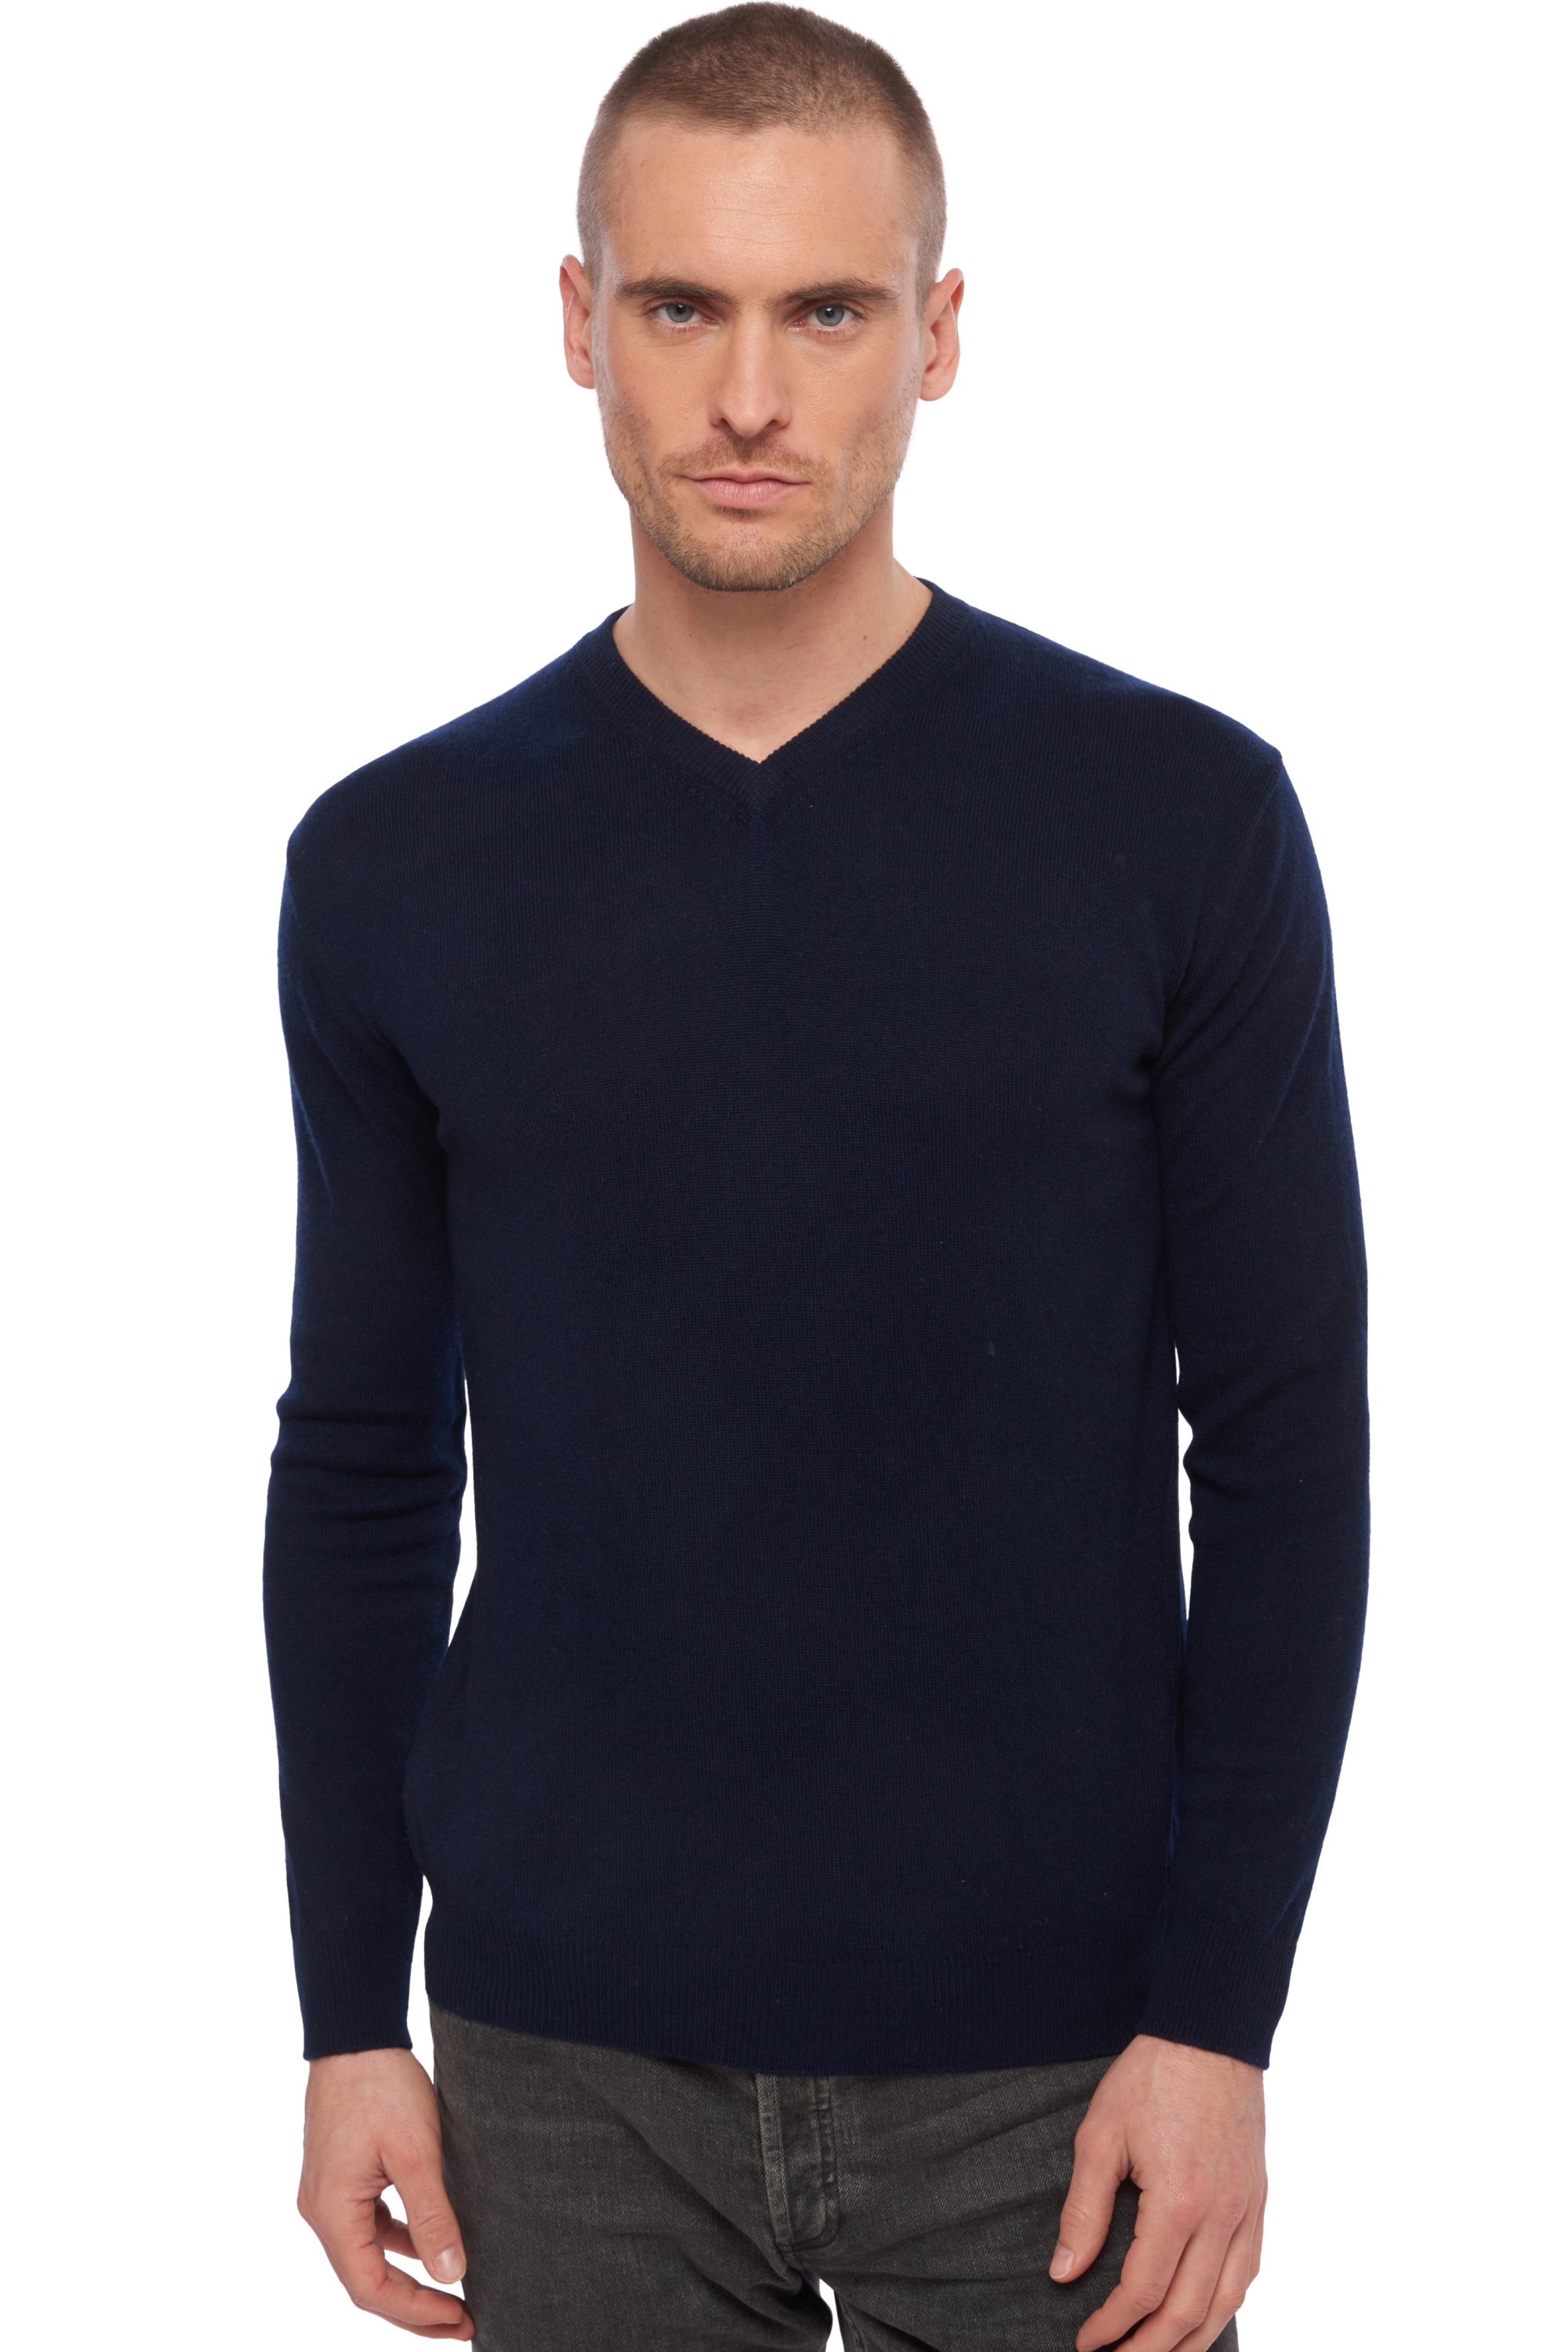 Cachemire pull homme col v maddox marine fonce s